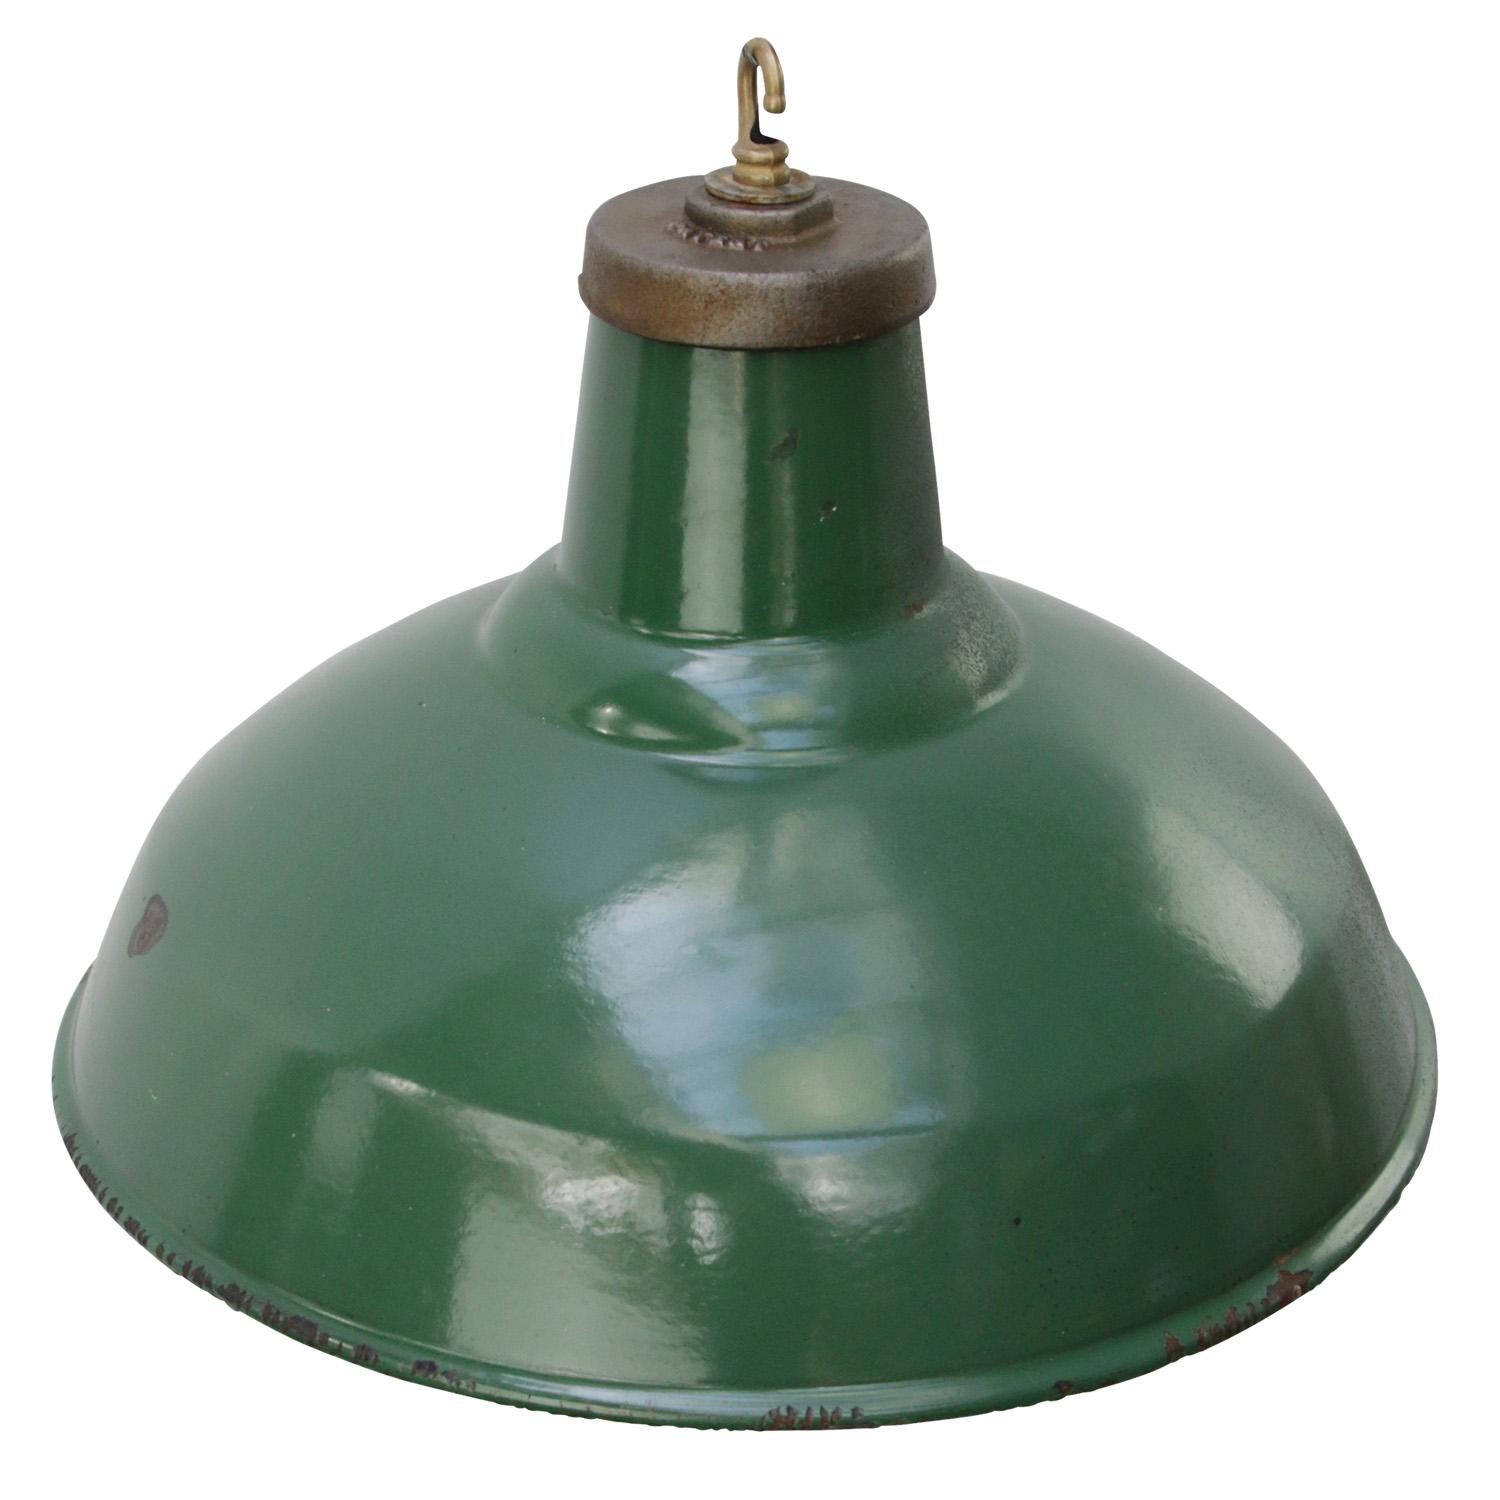 Vintage American green enamel industrial pendant lamp
White interior

Weight: 1.90 kg / 4.2 lb

Priced per individual item. All lamps have been made suitable by international standards for incandescent light bulbs, energy-efficient and LED